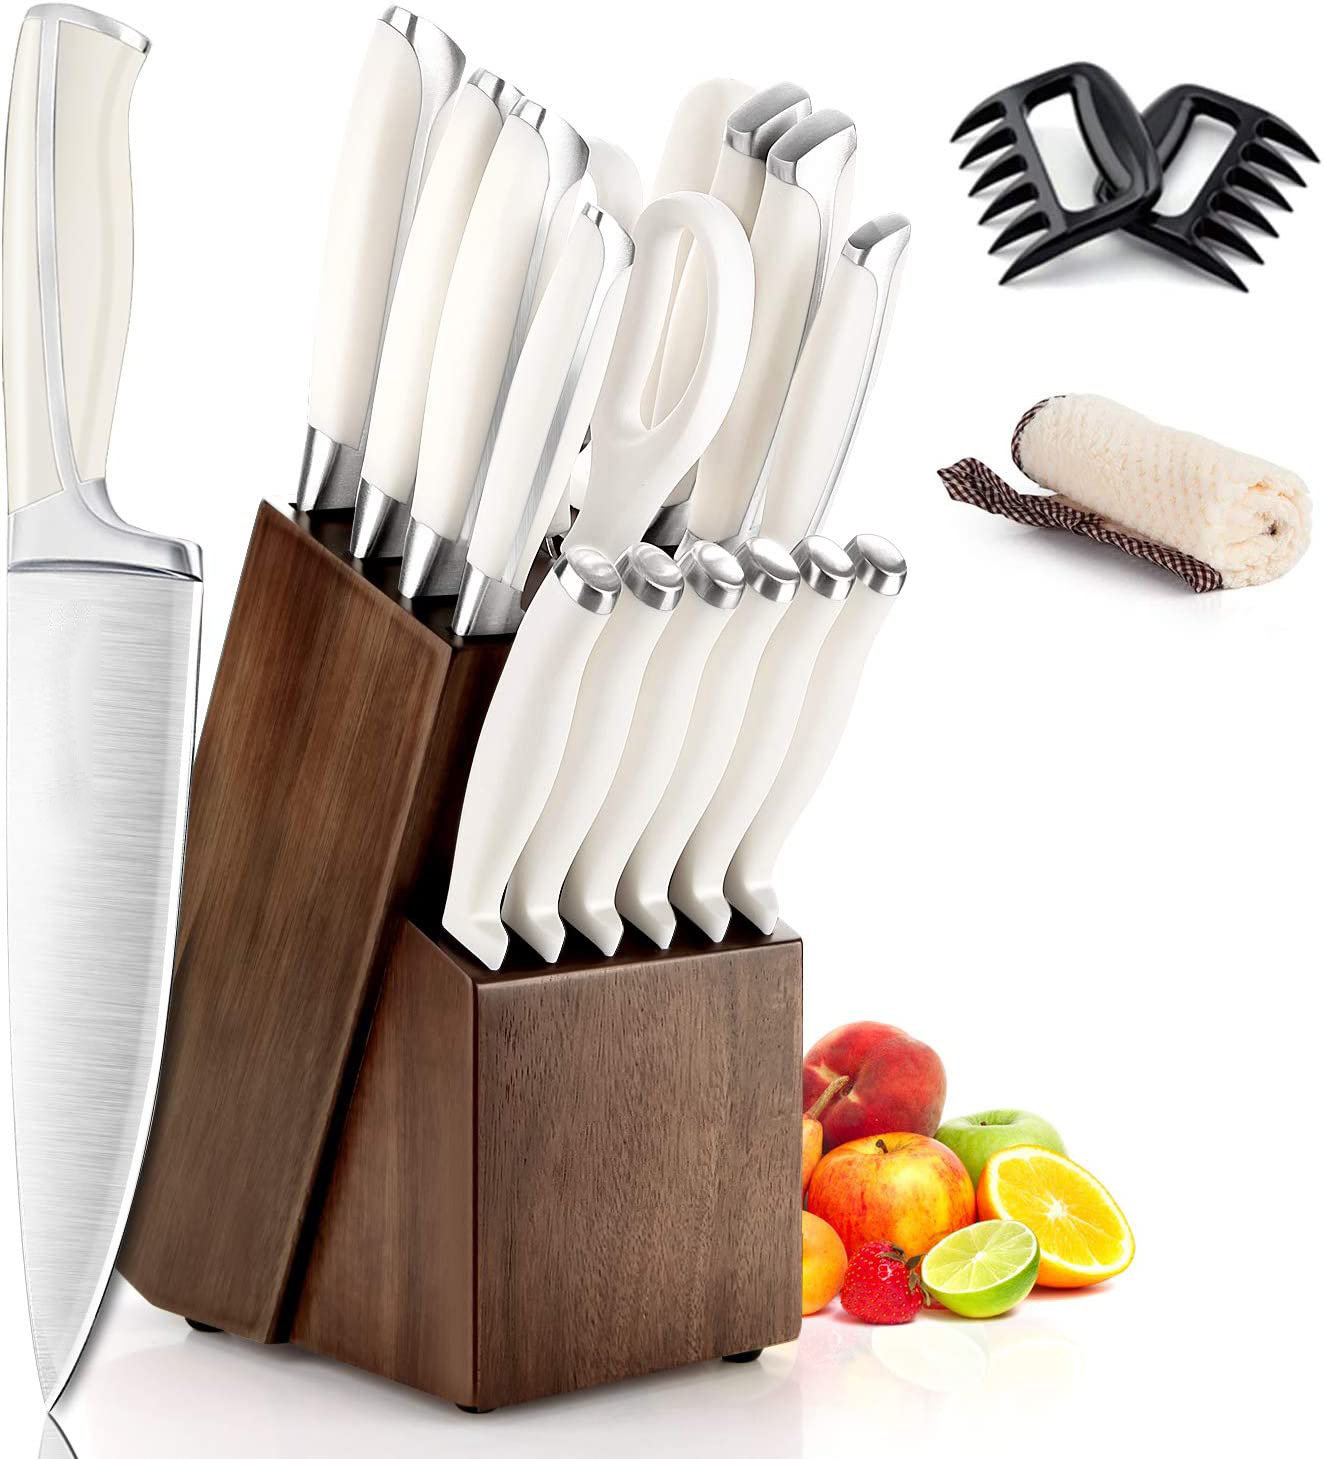  Knife Set, 21 Pieces Kitchen Knife Set with Block Wooden,  Germany High Carbon Stainless Steel Professional Chef Knife Block Set,  Ultra Sharp, Forged, Full-Tang (Black): Home & Kitchen